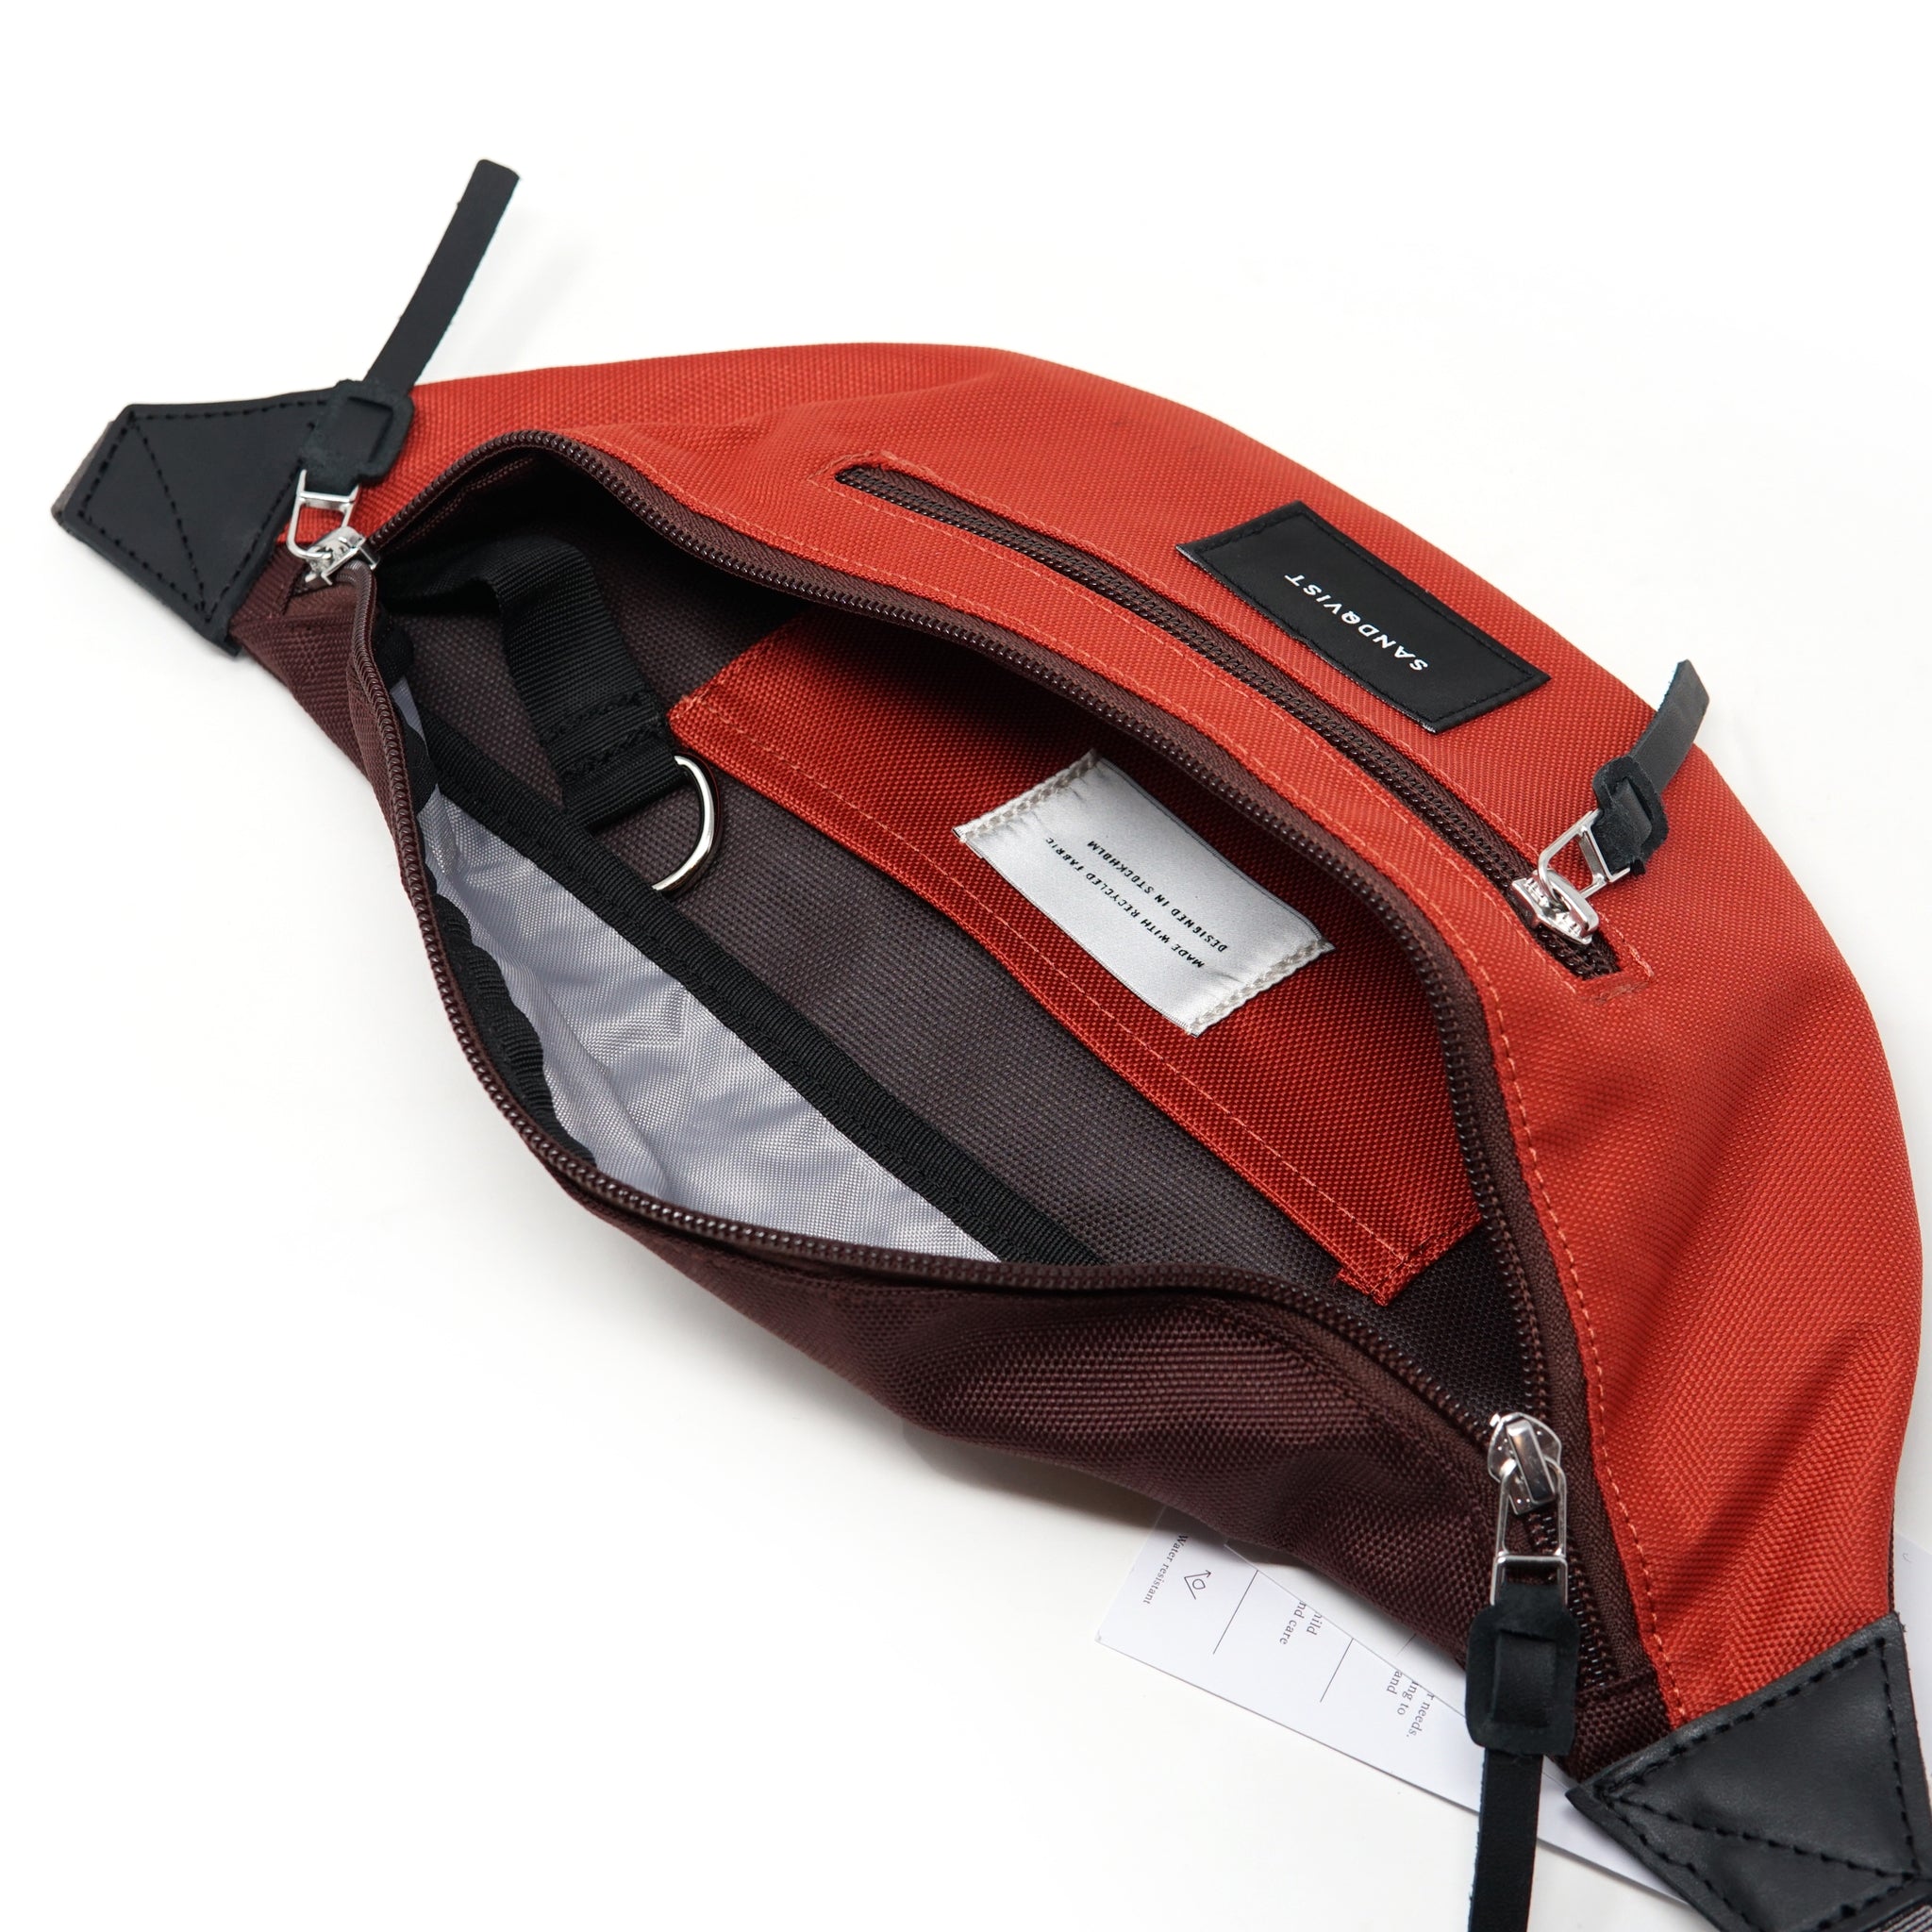 No:SQA1957 | Name:ASTE | Color:Multi Moss Red With Black Leather【SANDQVIST_サンドクヴィスト】